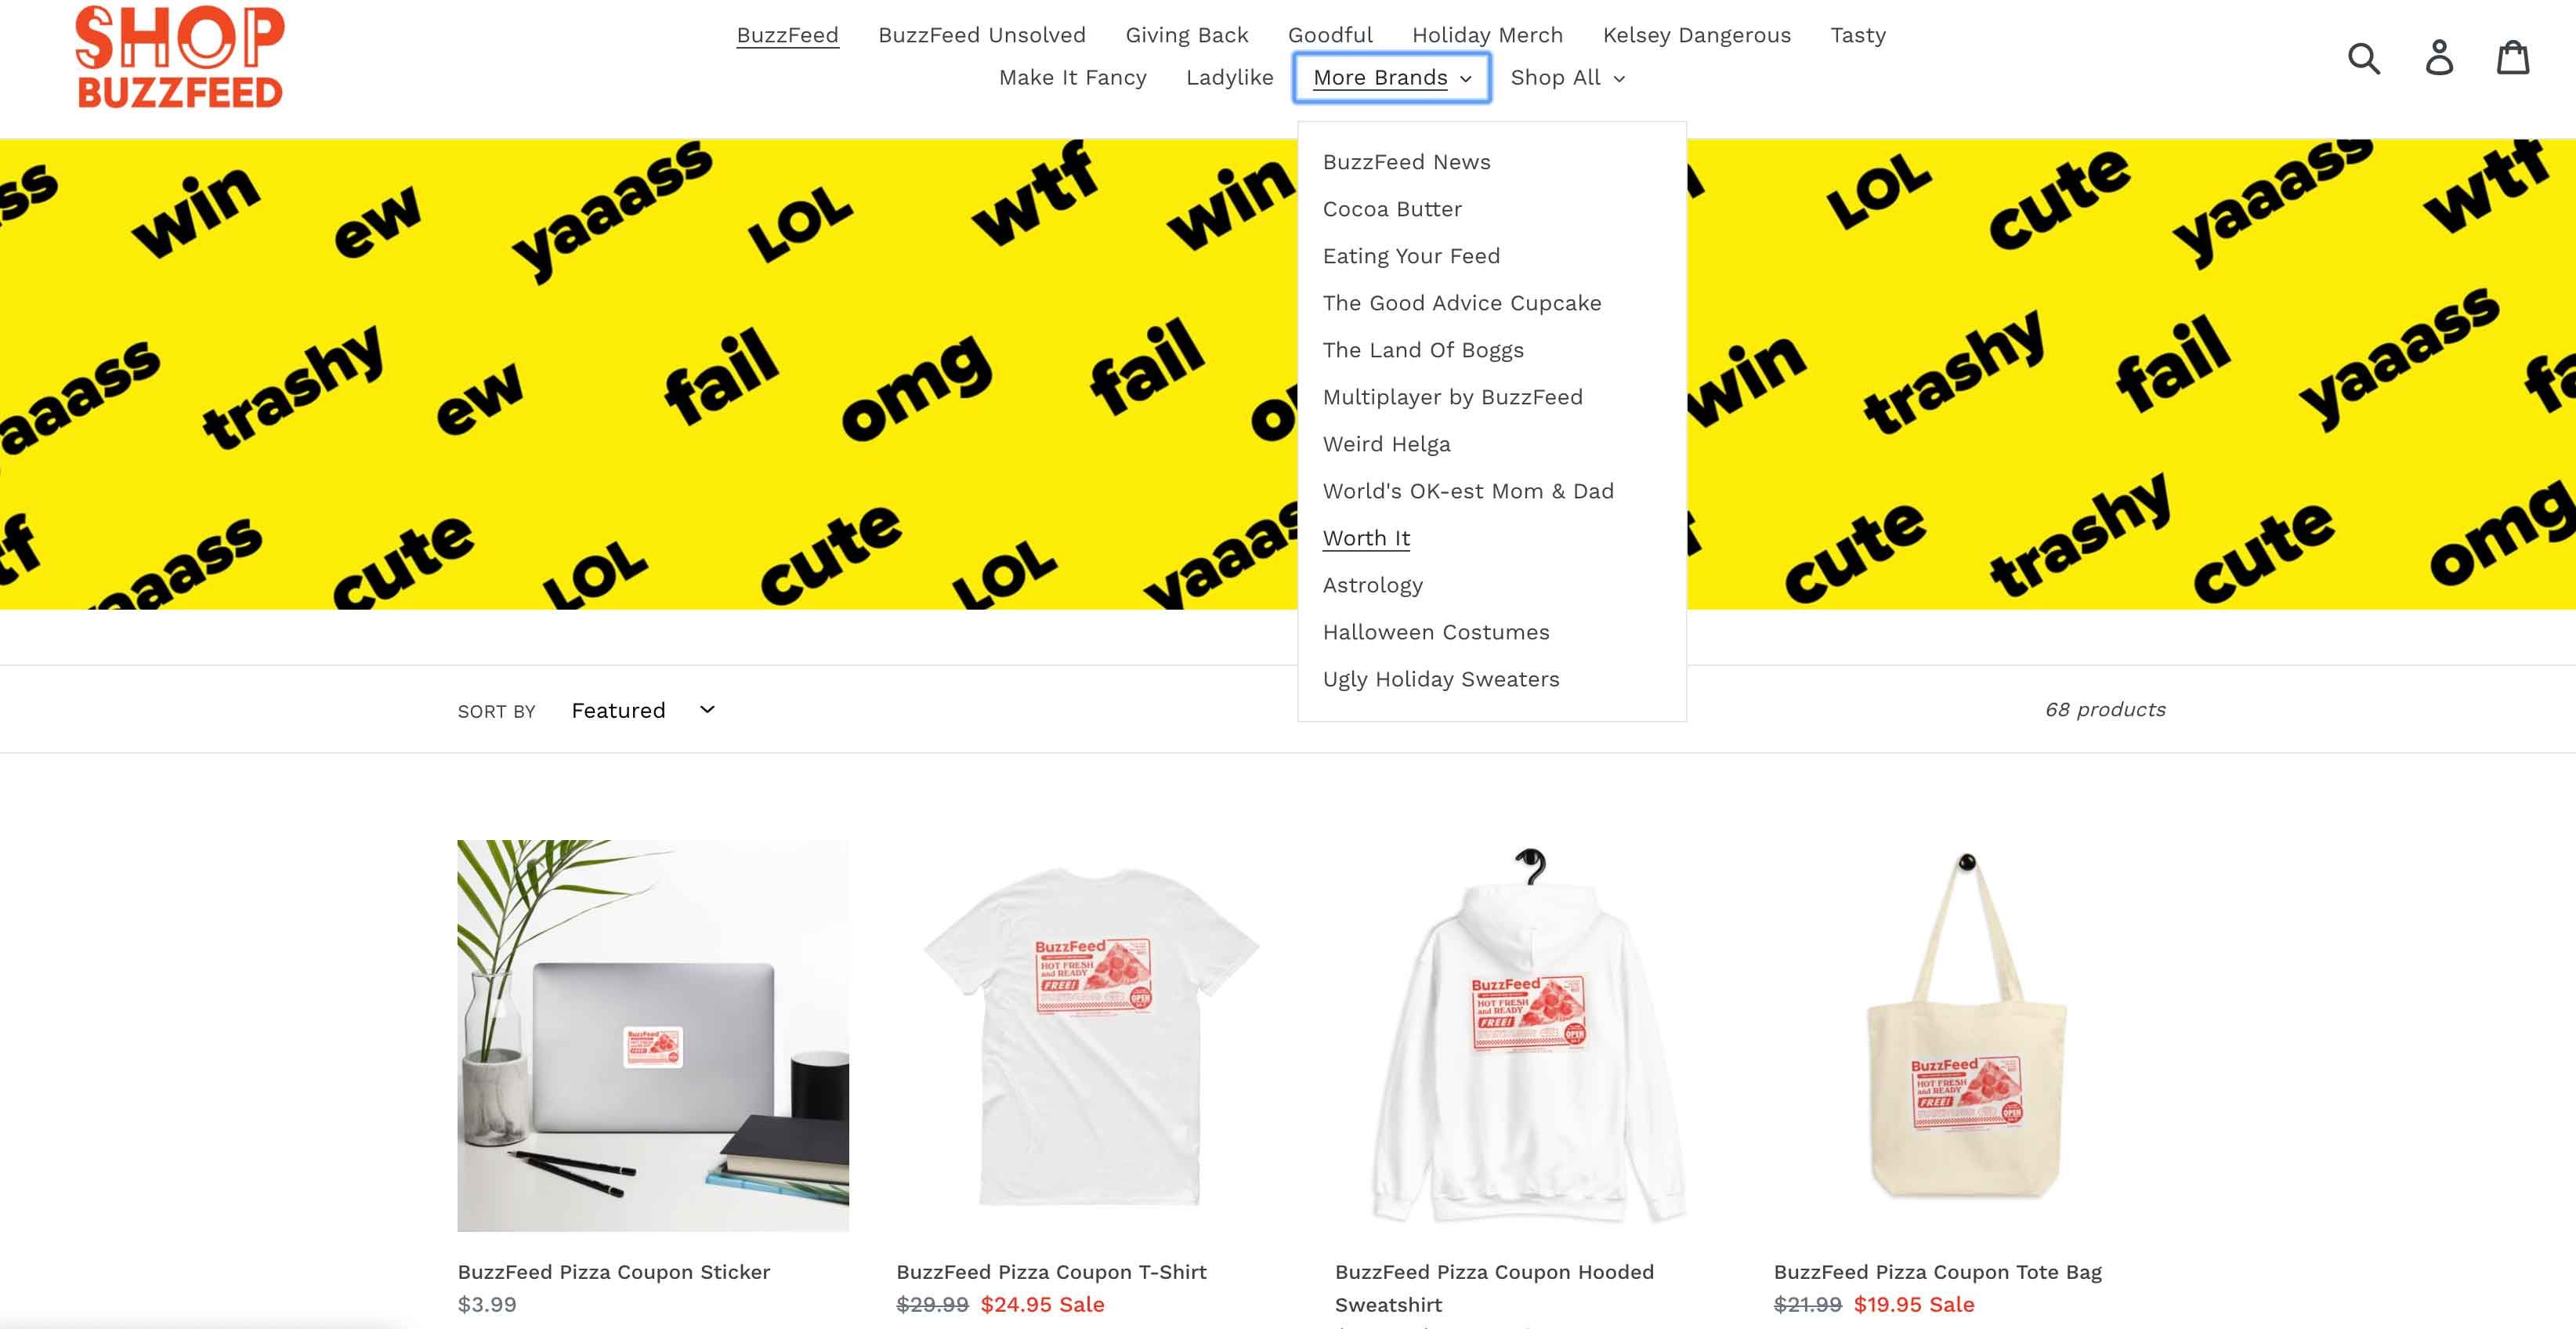 Digital Publishing Strategy: Buzzfeed has its own online shop